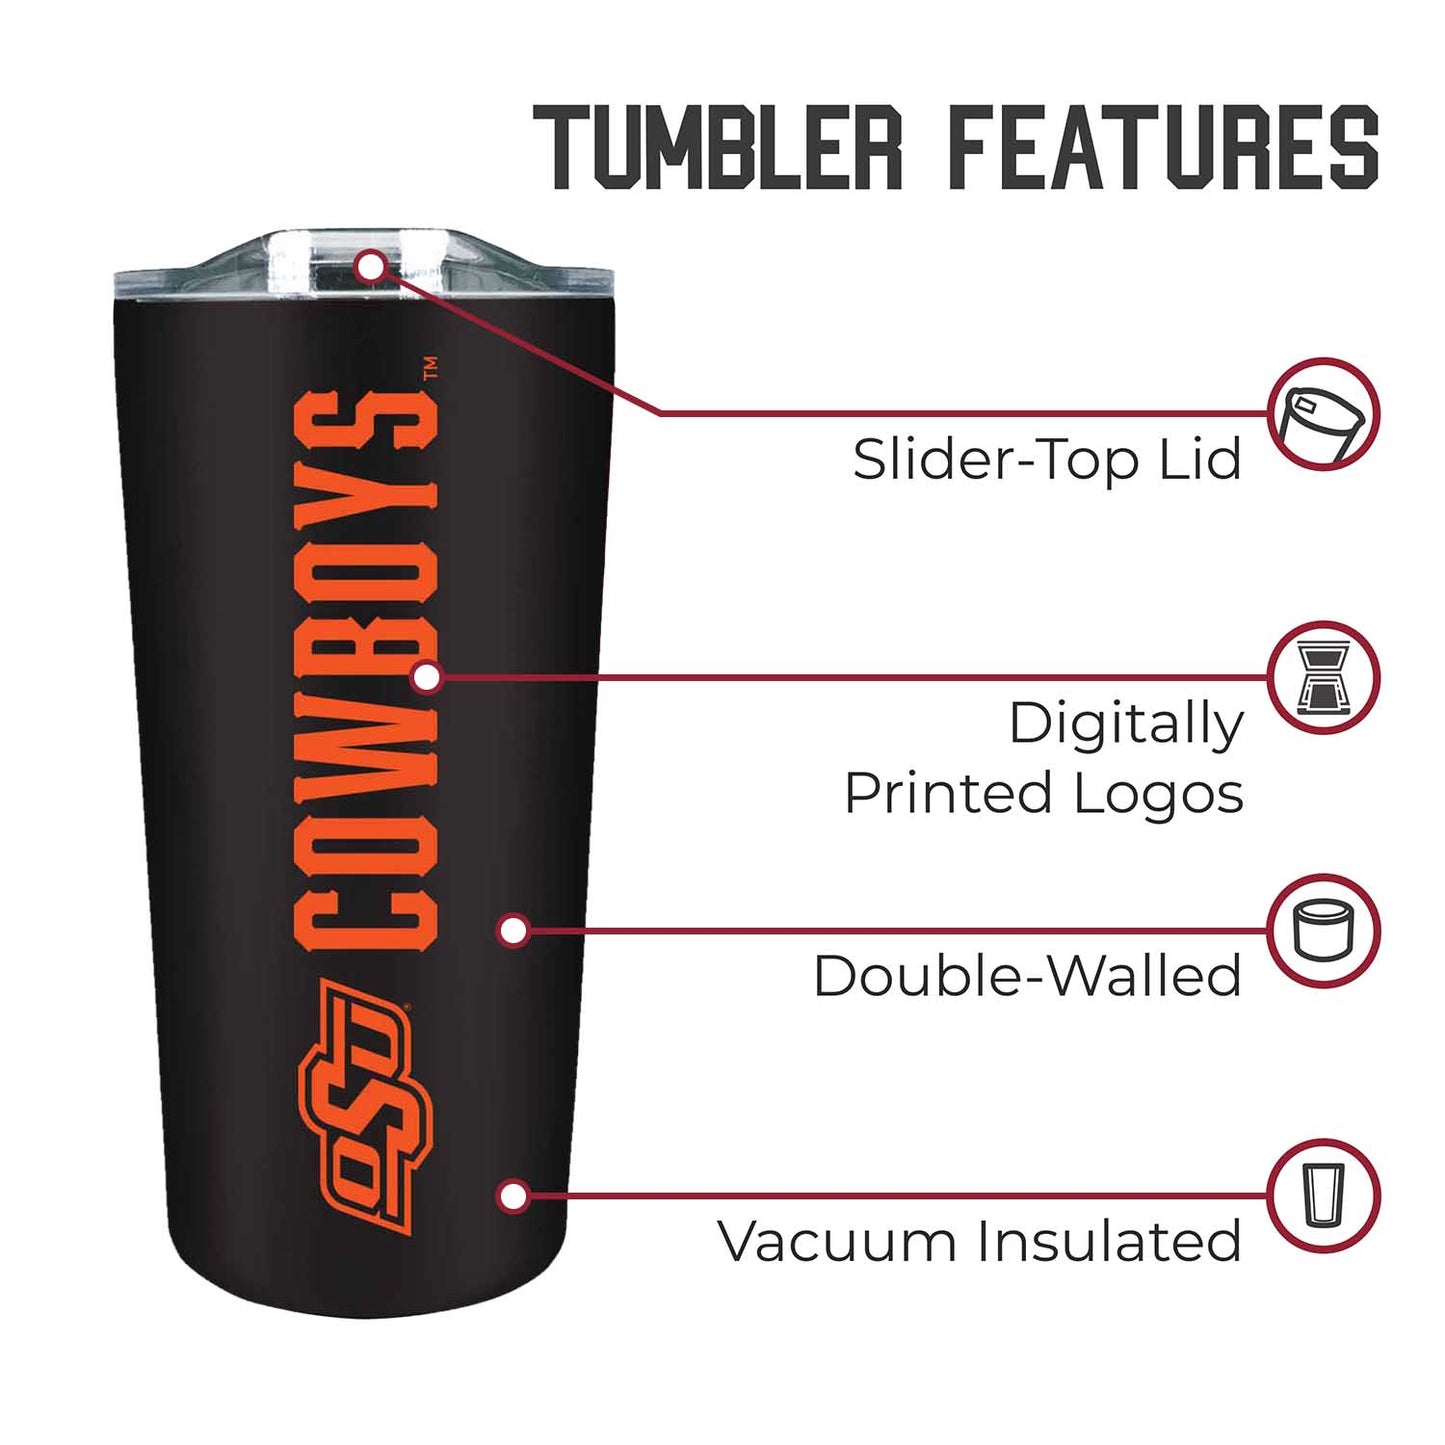 Oklahoma State Cowboys NCAA Stainless Steel Tumbler perfect for Gameday - Black